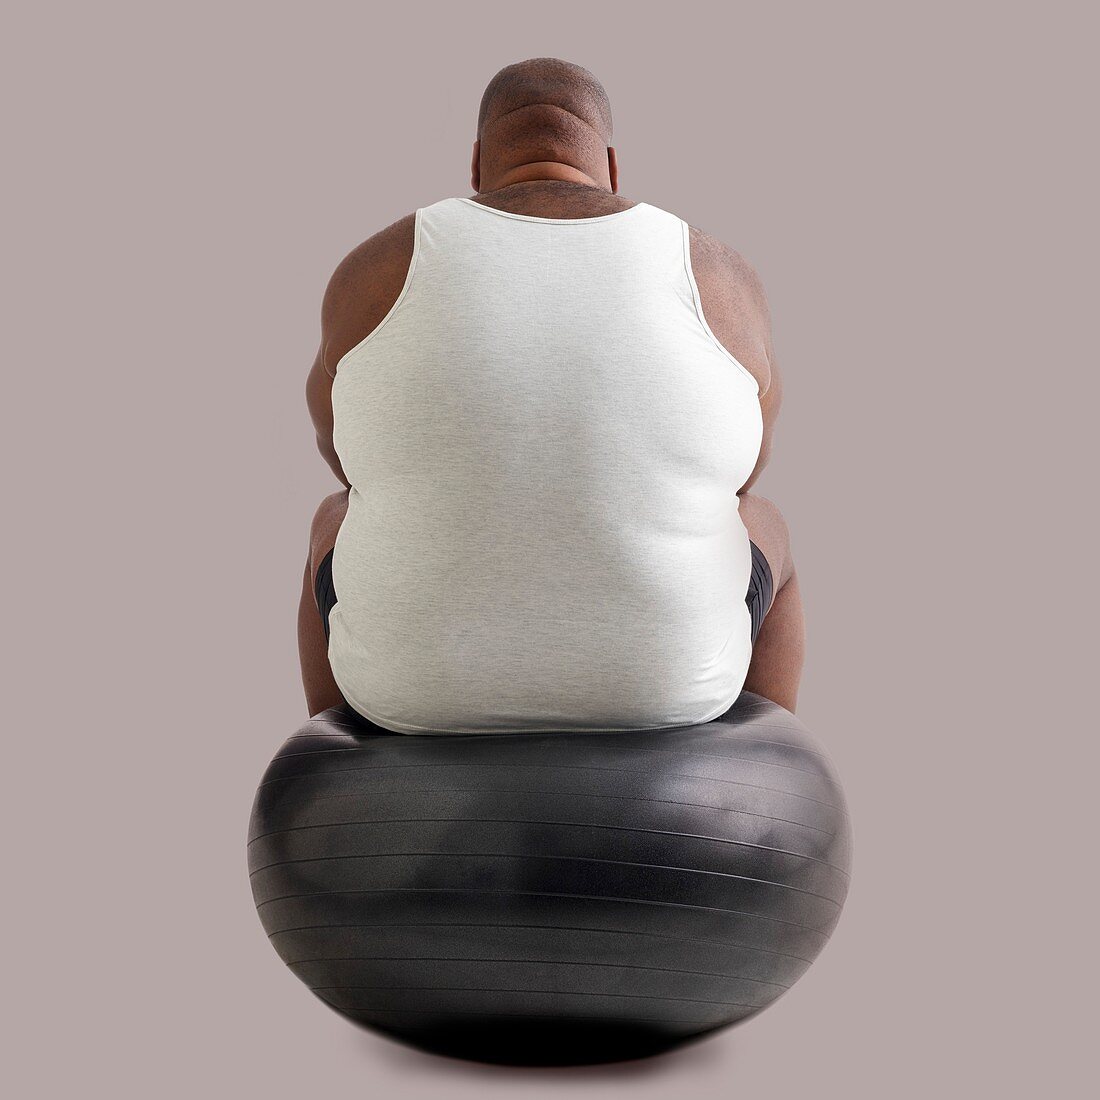 Overweight man sitting on an exercise ball